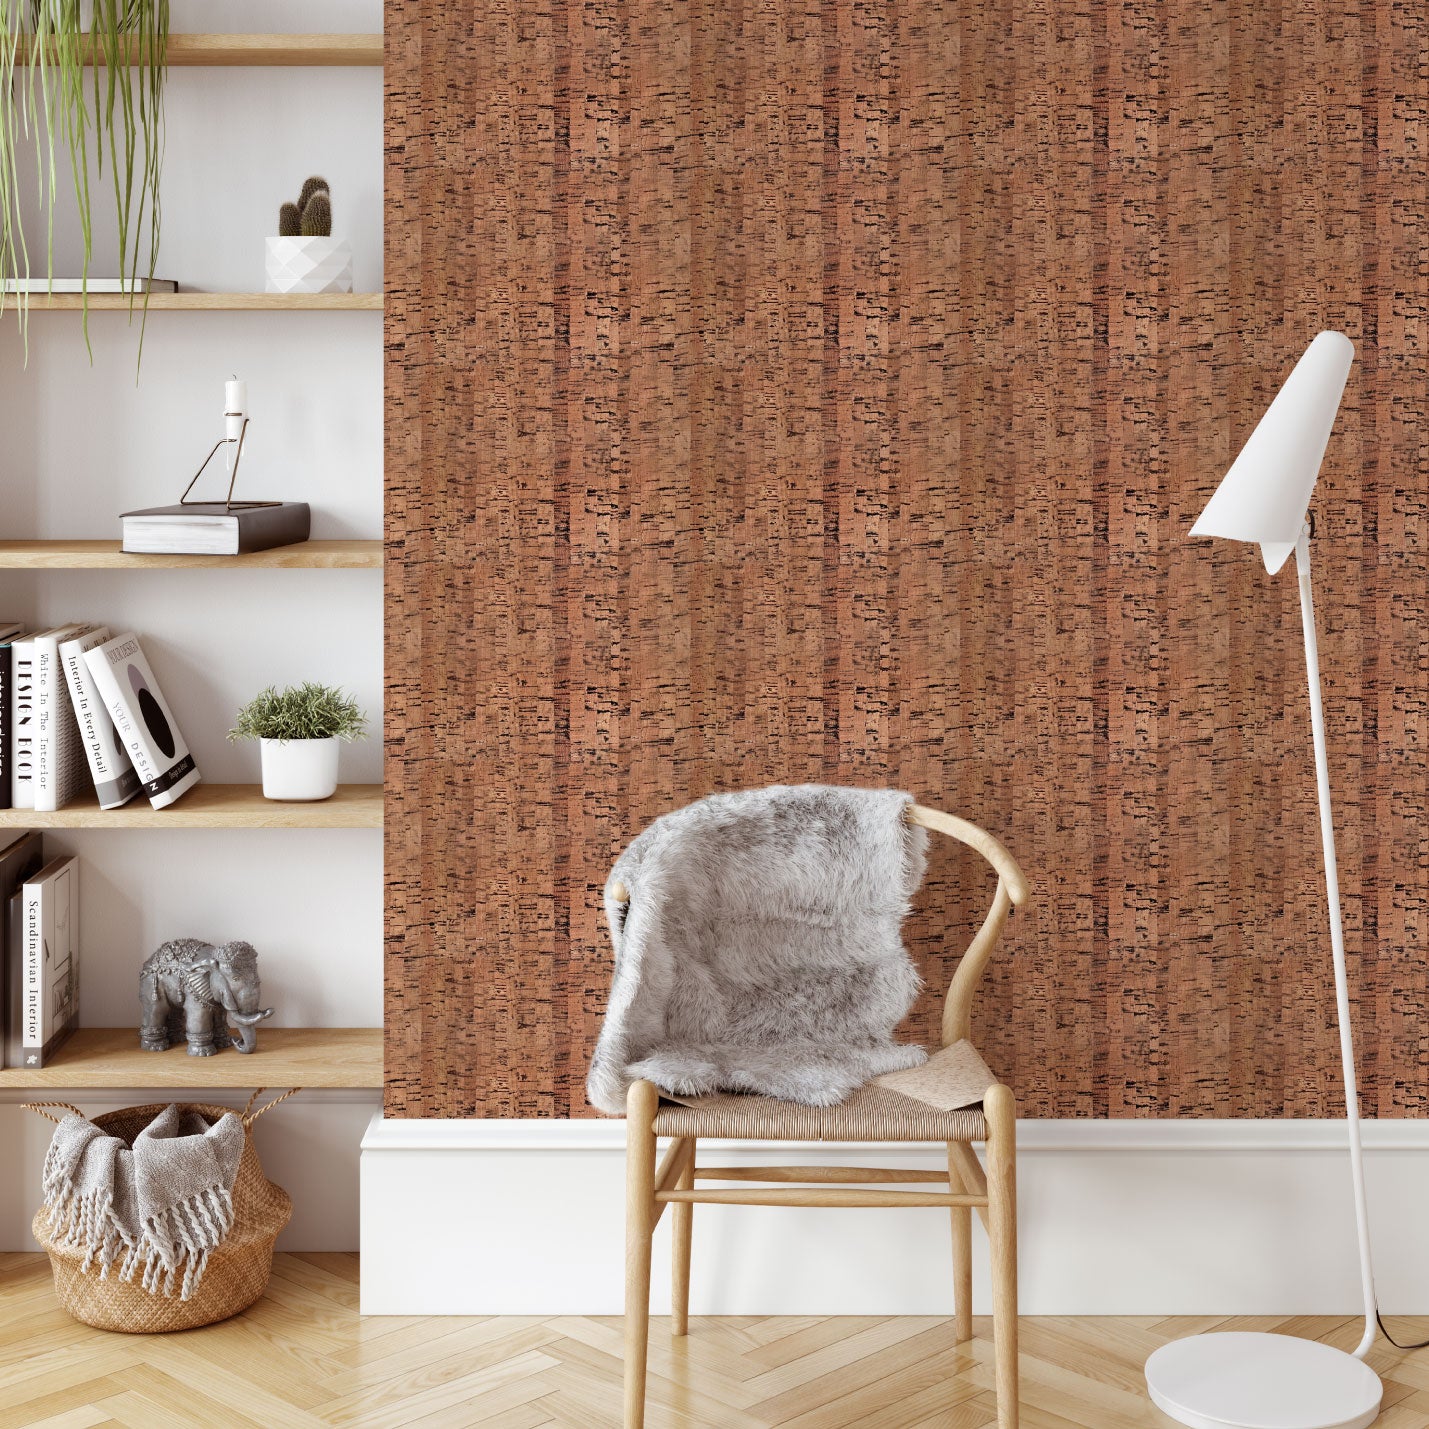 Natural Textured Eco-Friendly Non-toxic High-quality Sustainable practices Sustainability Interior Design Wall covering Bold Wallpaper Custom Tailor-made Retro chic cork nature luxury metallic shiny wood timeless coastal vacation interior design grain high-end brown grain shiny black living room office